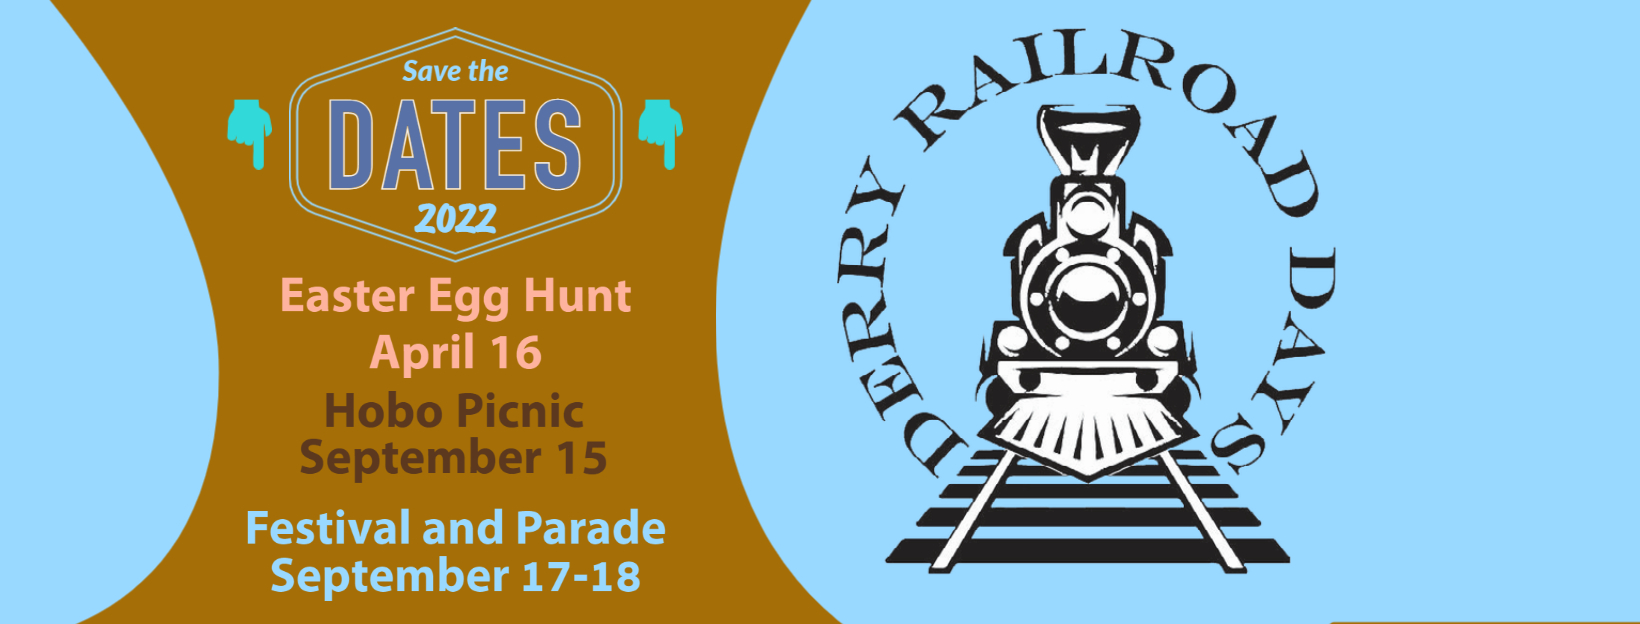 Derry Railroad Days Staying on Track!